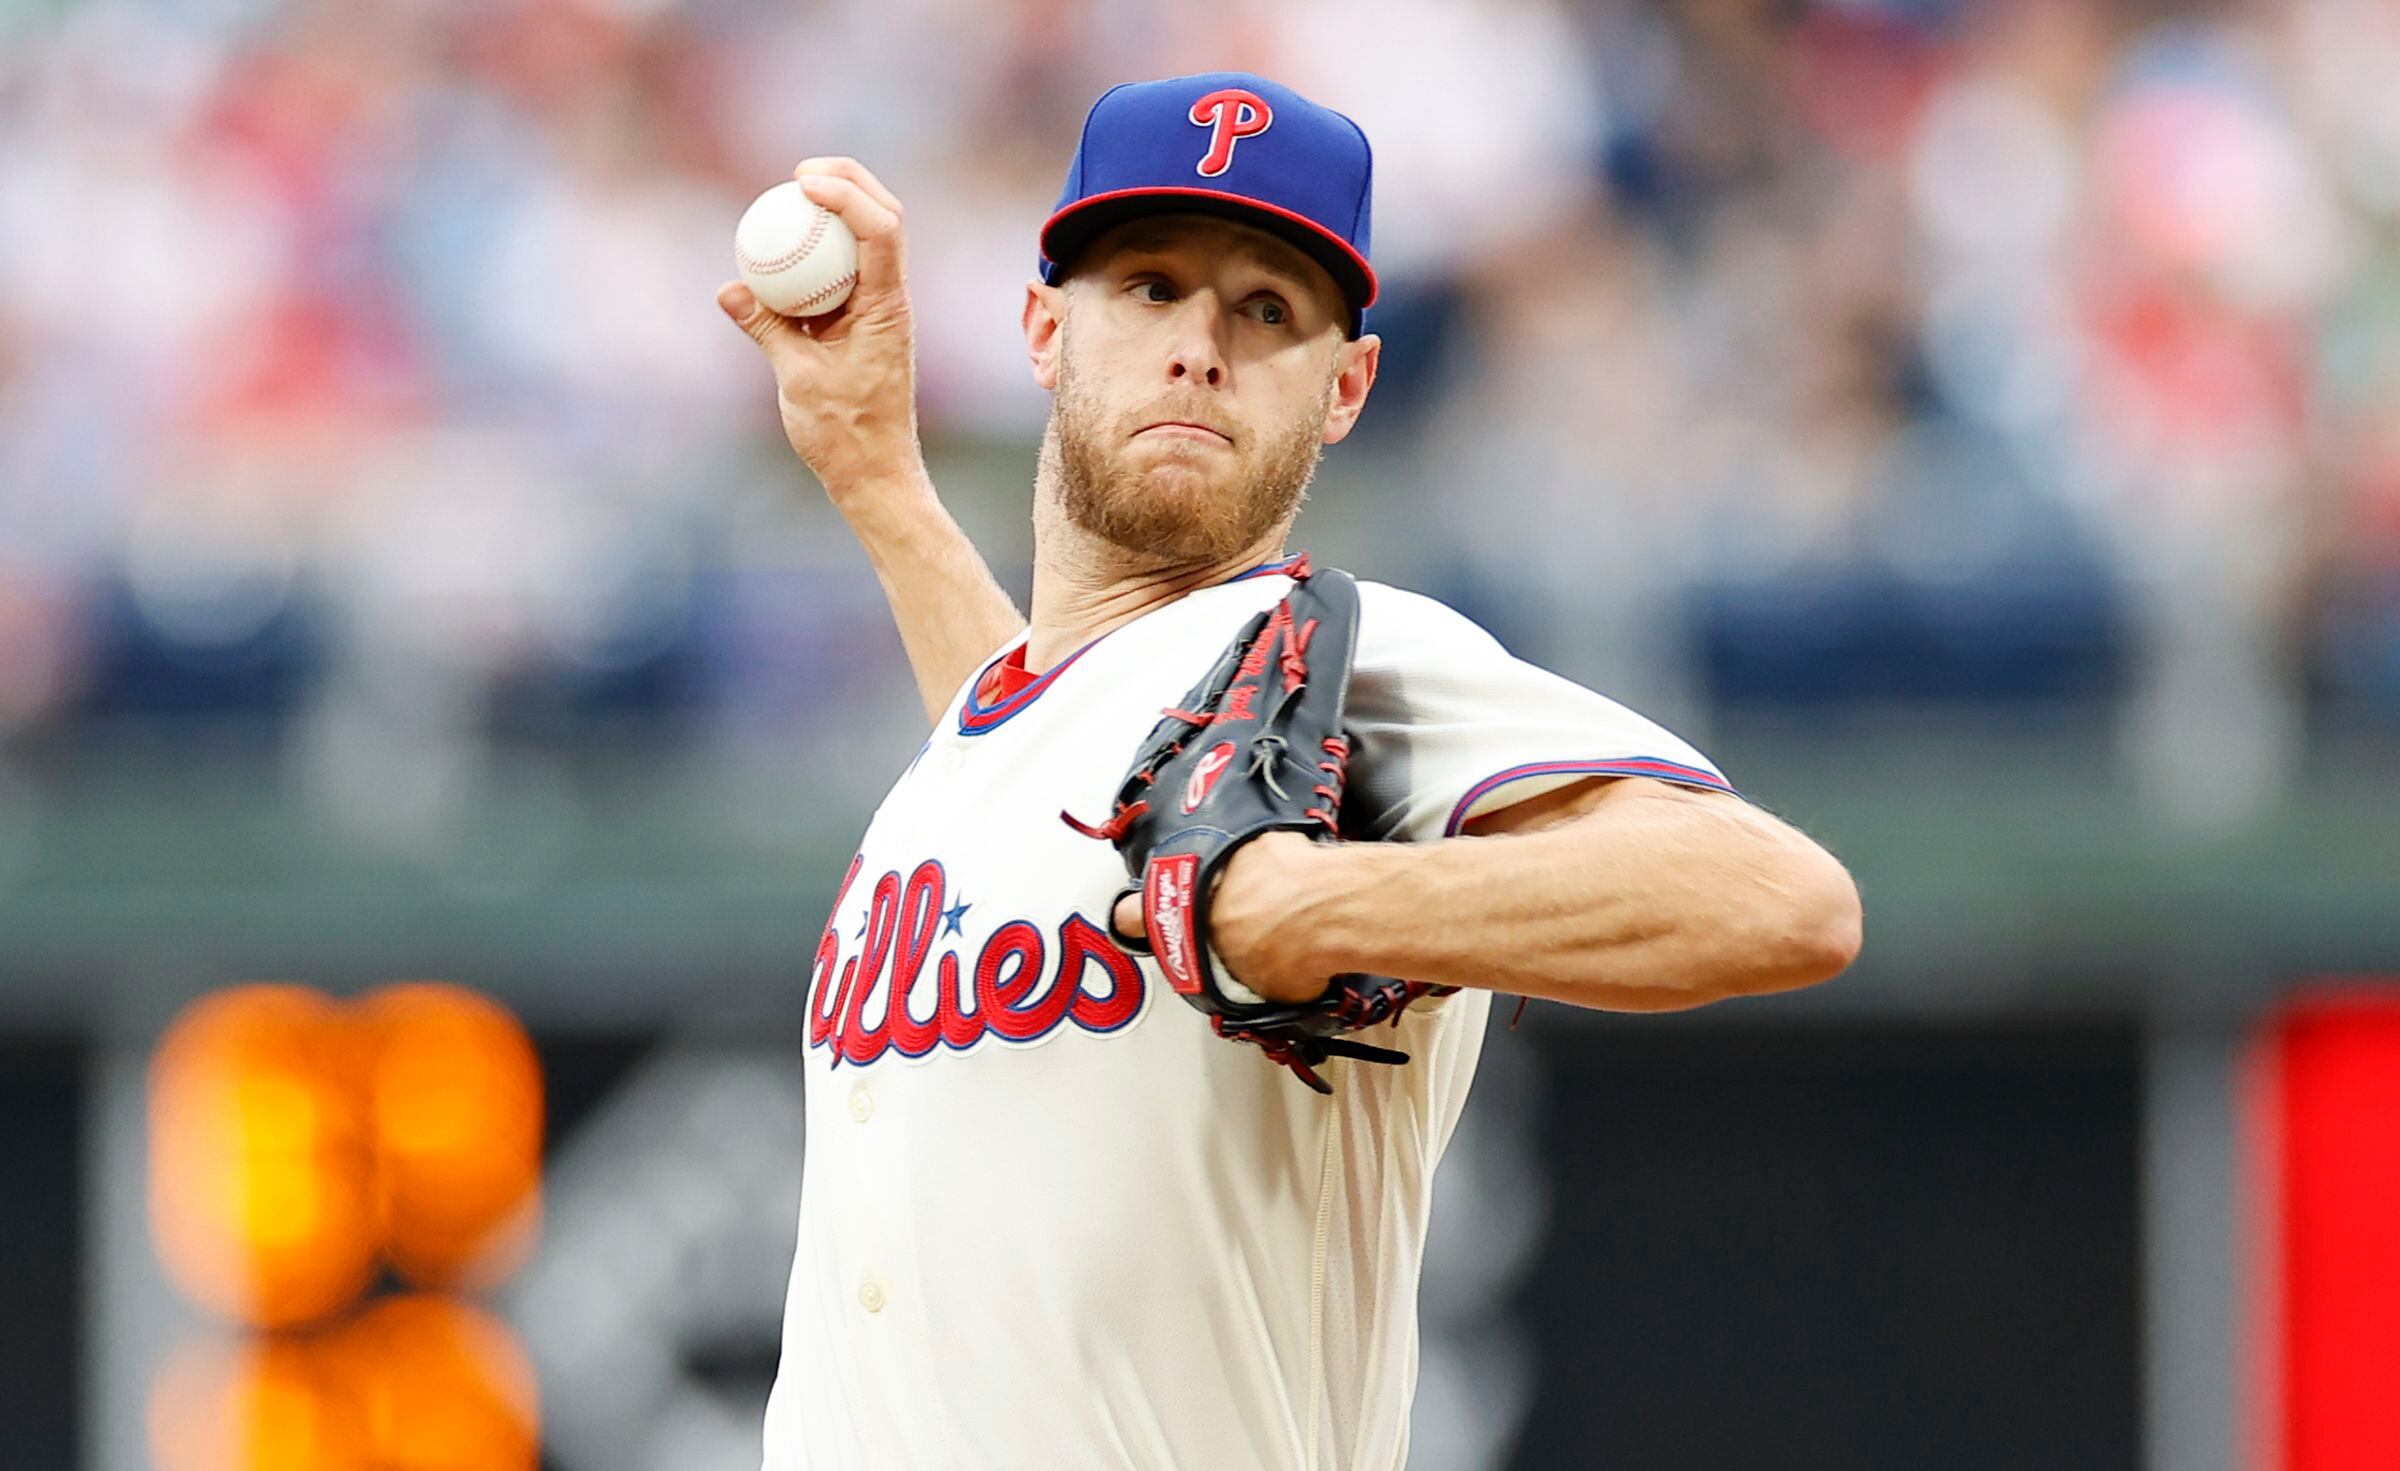 Will Phillies aces Aaron Nola and Zack Wheeler split the Cy Young voting?